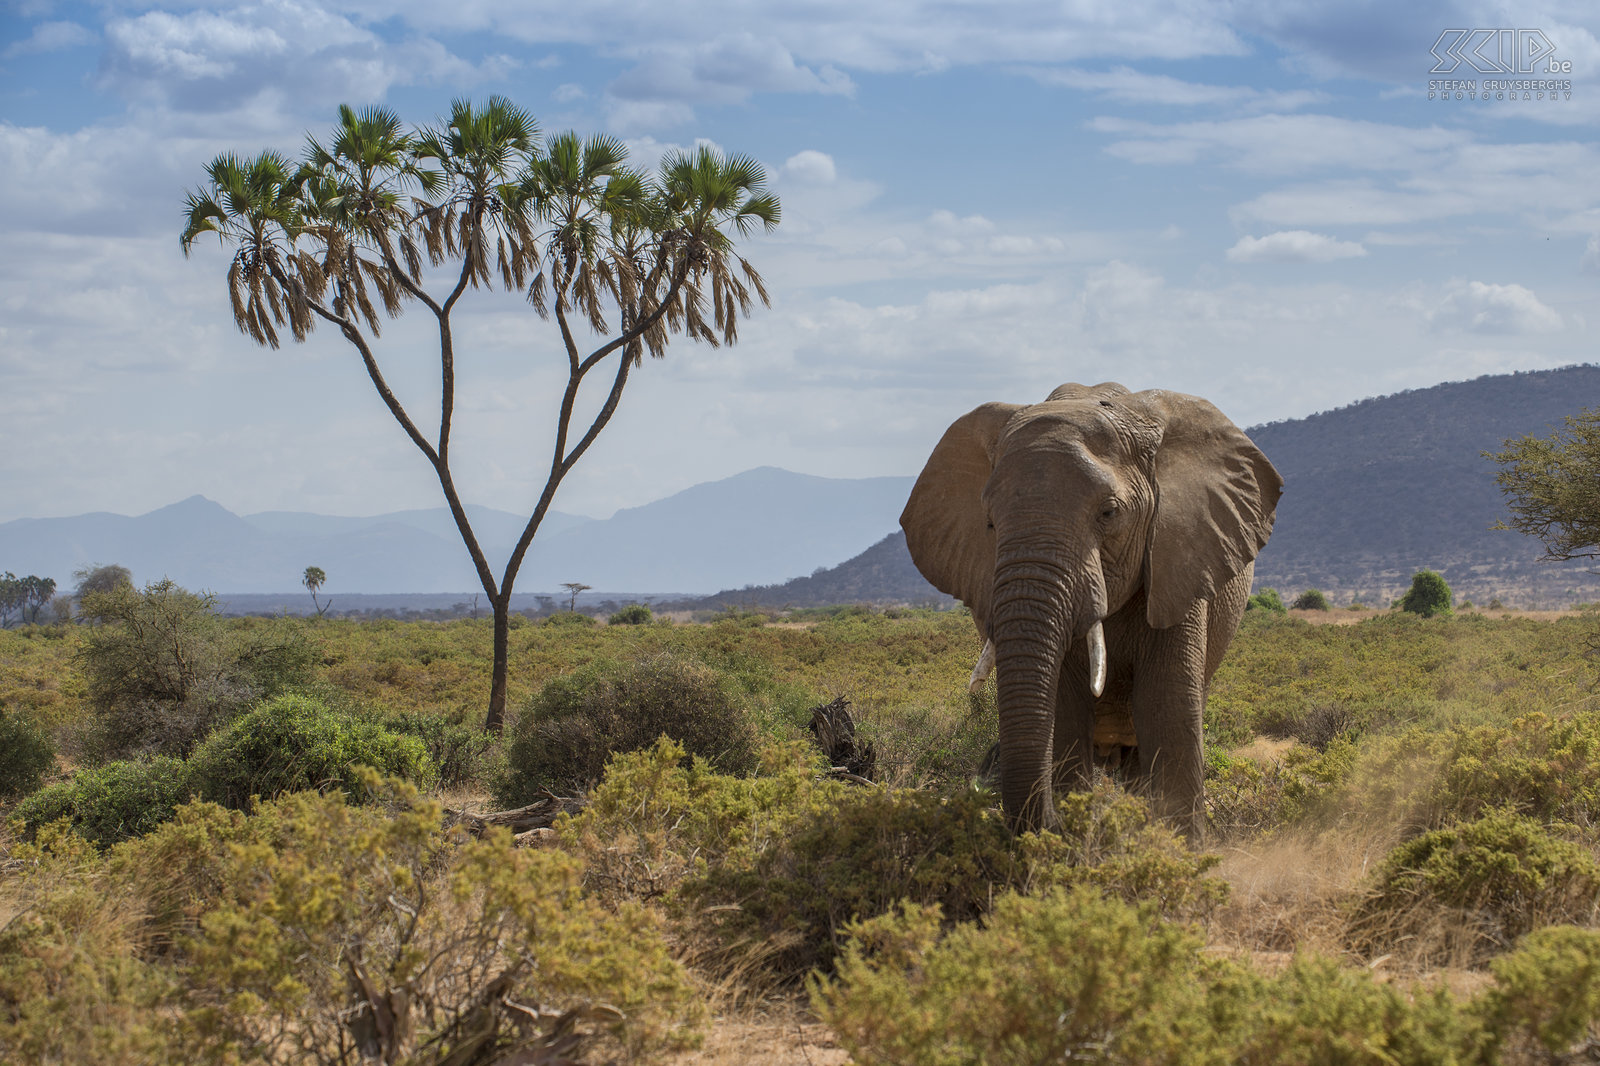 Samburu - Elephant Samburu National Park has a mixture of acacia, riverine forest, thorn trees and savanna vegetation. In the middle of the reserve, the Ewaso Ng'iro flows through palm groves. Of course the river attracts a lot of elephants. Stefan Cruysberghs